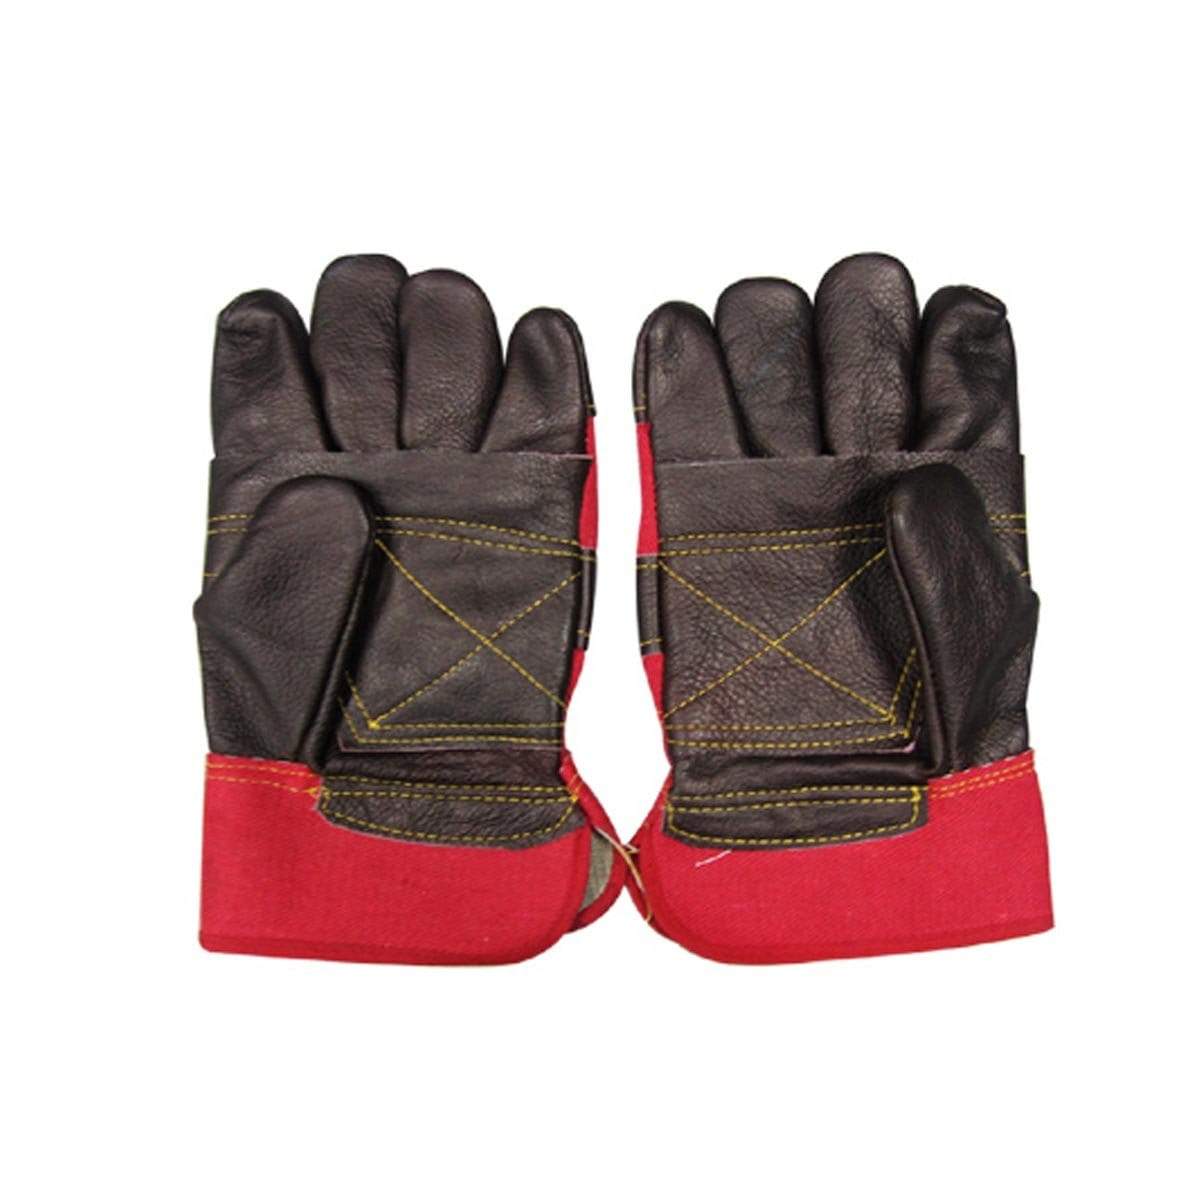 WORKER Furniture Leather Gloves G5000